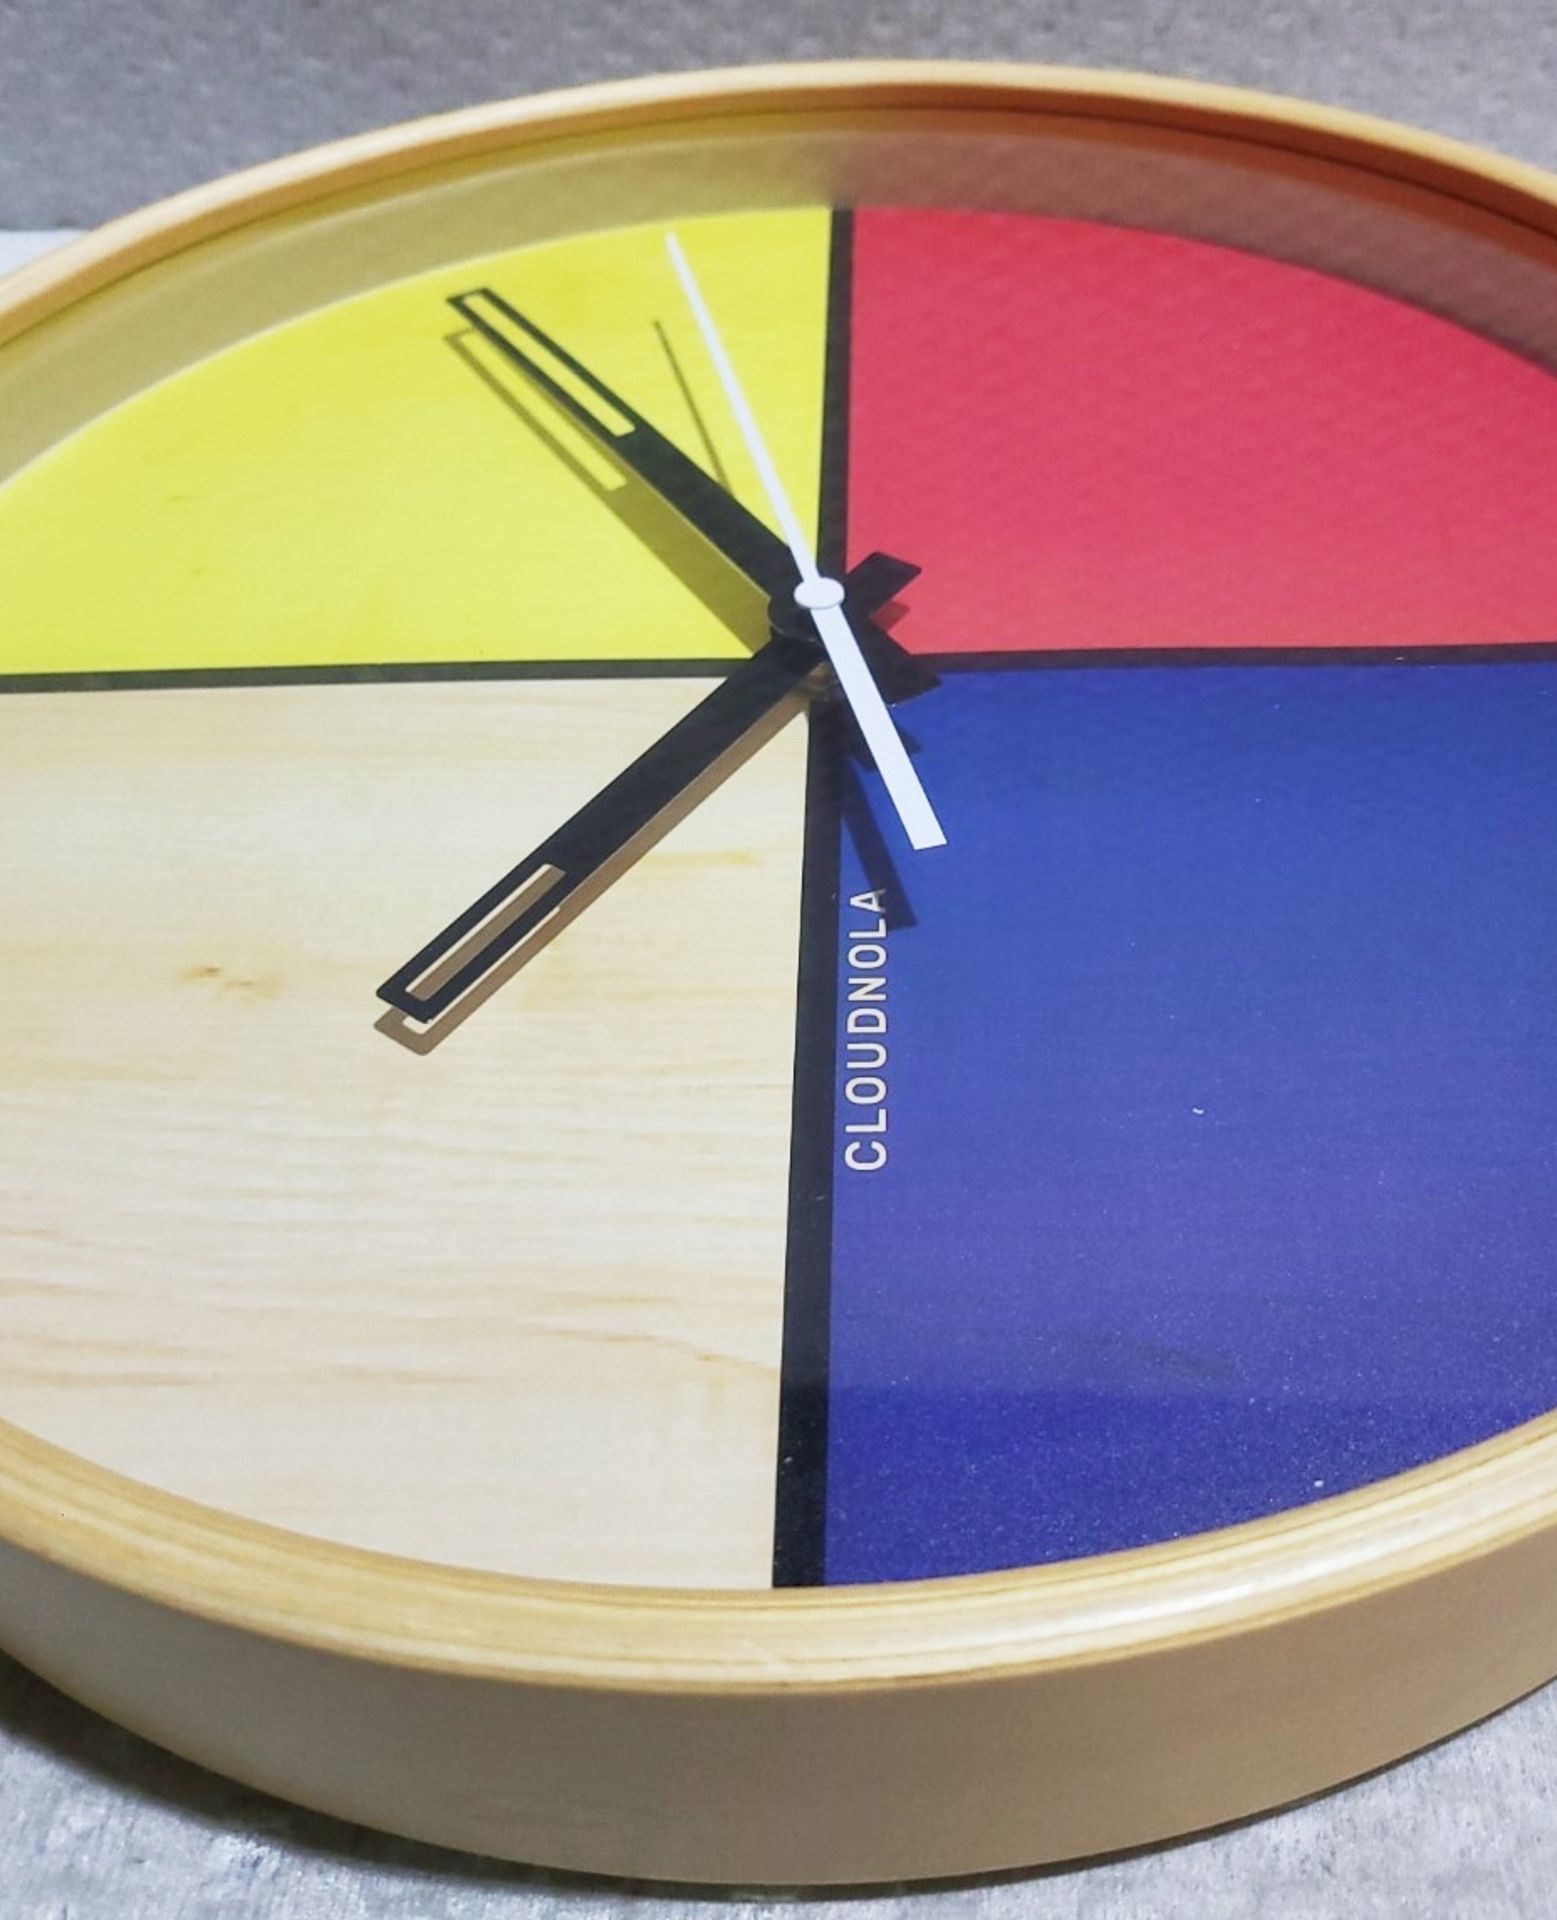 1 x CLOUDNOLA Contemporary Flur Yellow, Red, Blue & Birch Wall Clock With Offset Wooden Rim 30cm - Image 3 of 8